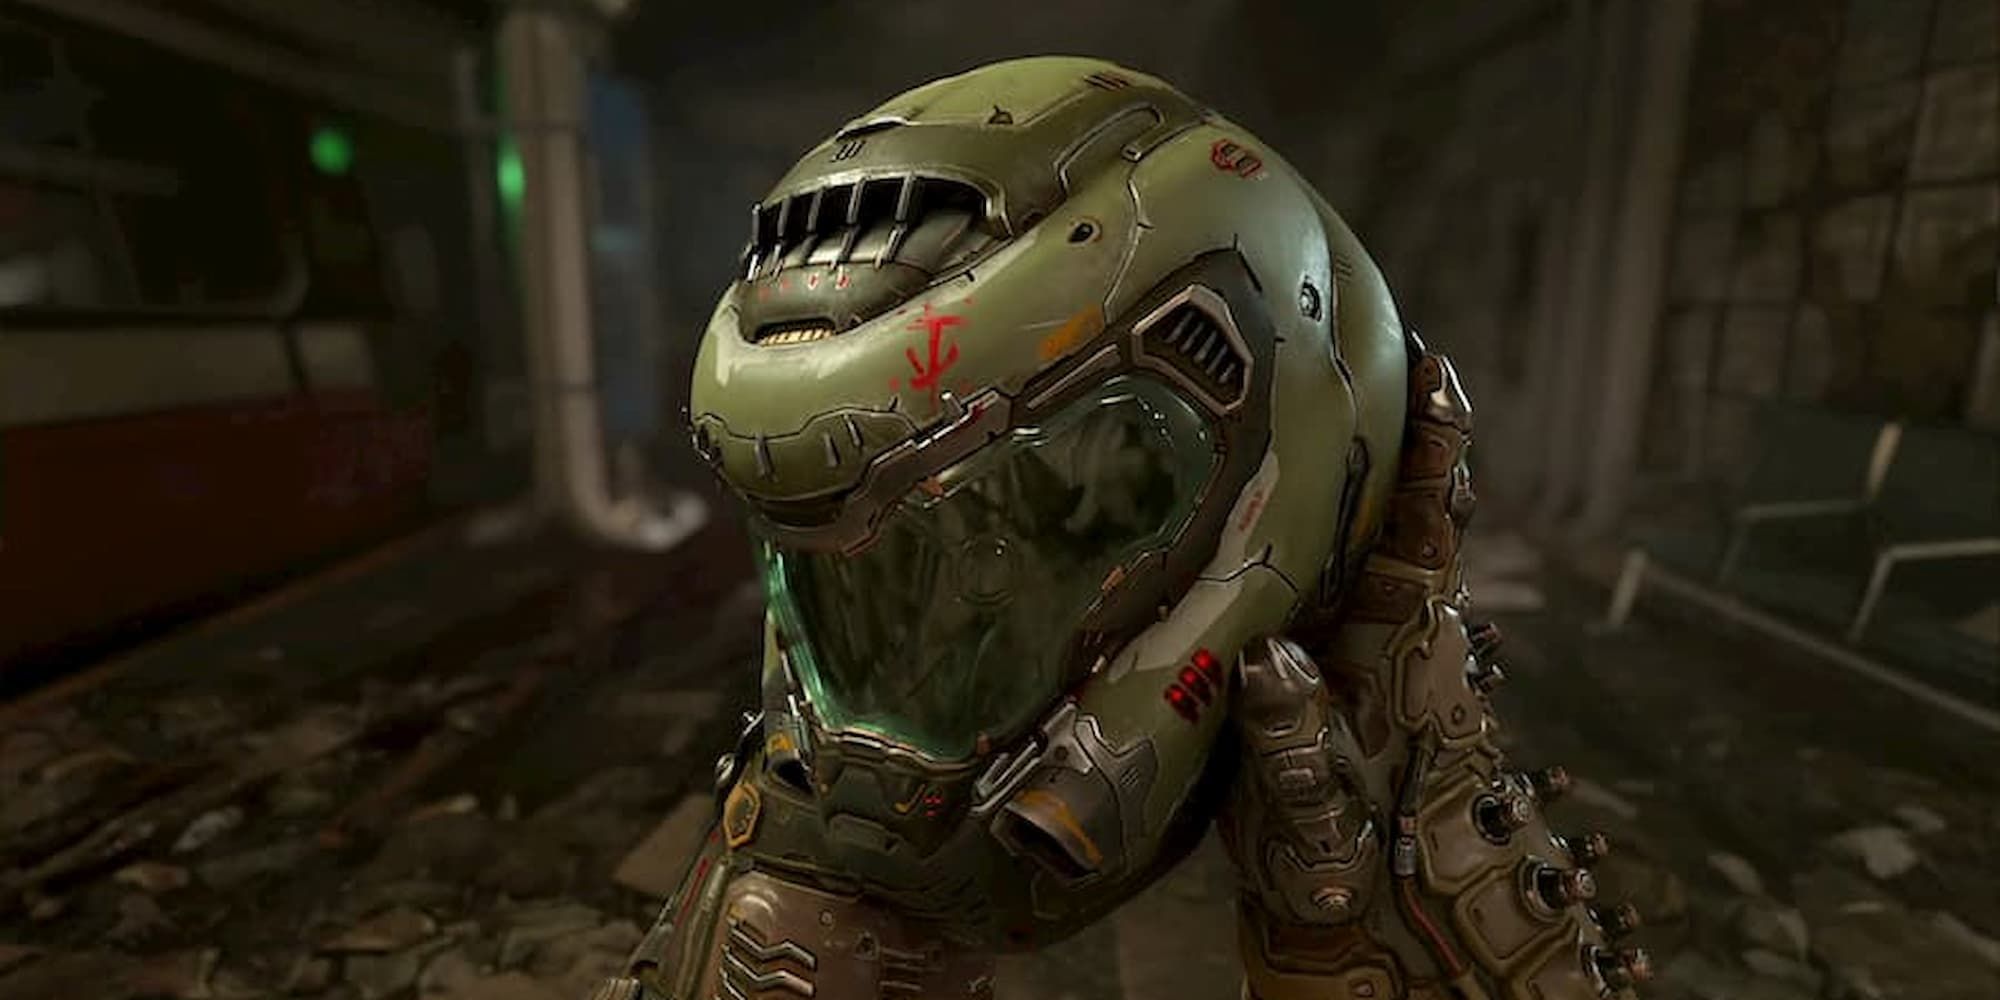 The Doom Slayer in Doom Eternal lifts up and inspects his helmet.